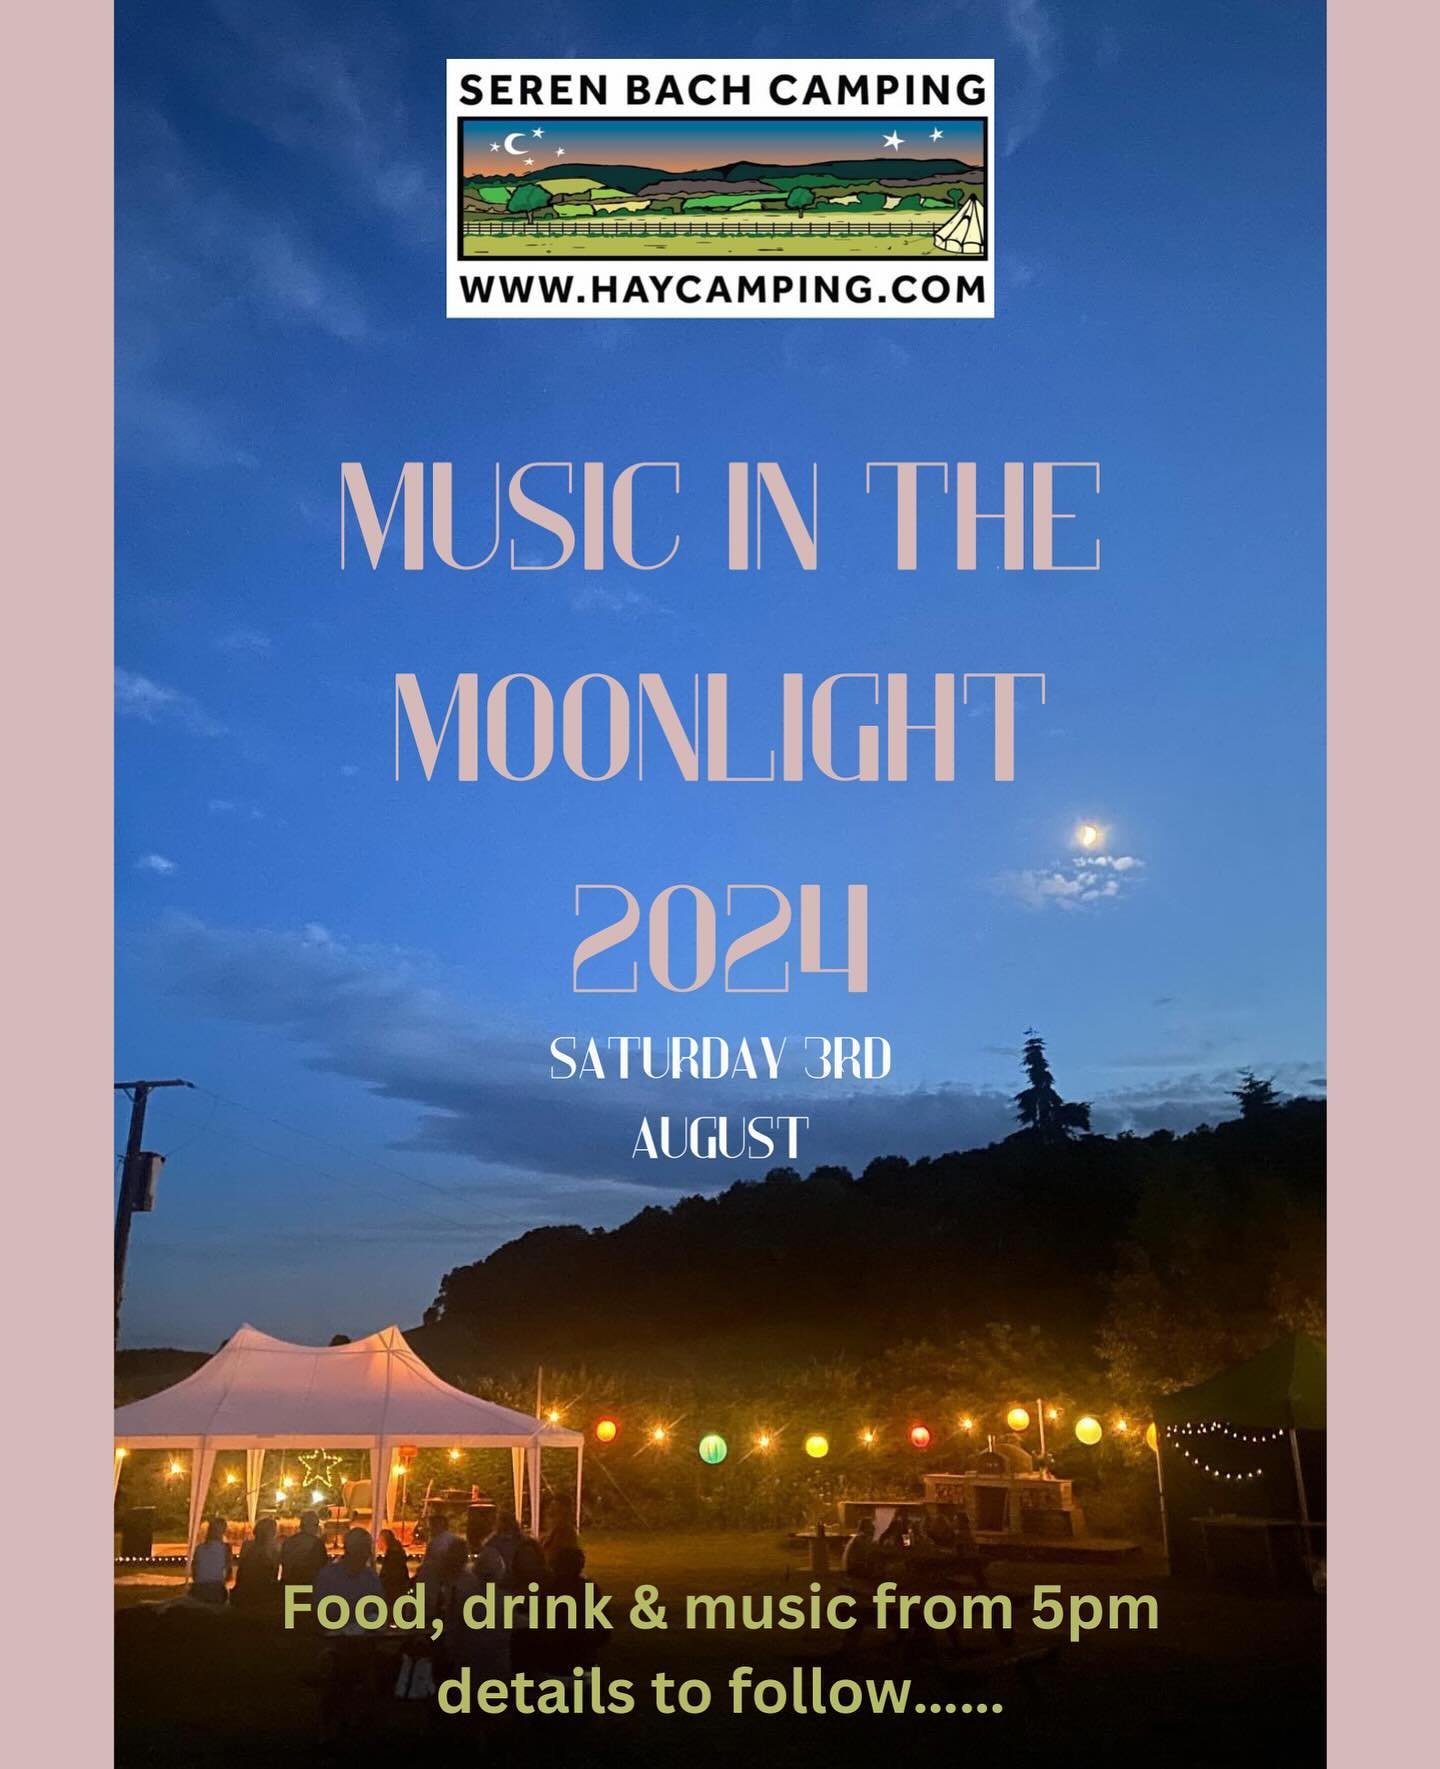 Join us for another night of music in the moonlight on Saturday 3rd august. We will be joined by local food and drink suppliers and lively music from The Slippery Slope Trio (think gypsy folk vibe!). General entry &pound;3 per person and camping &pou